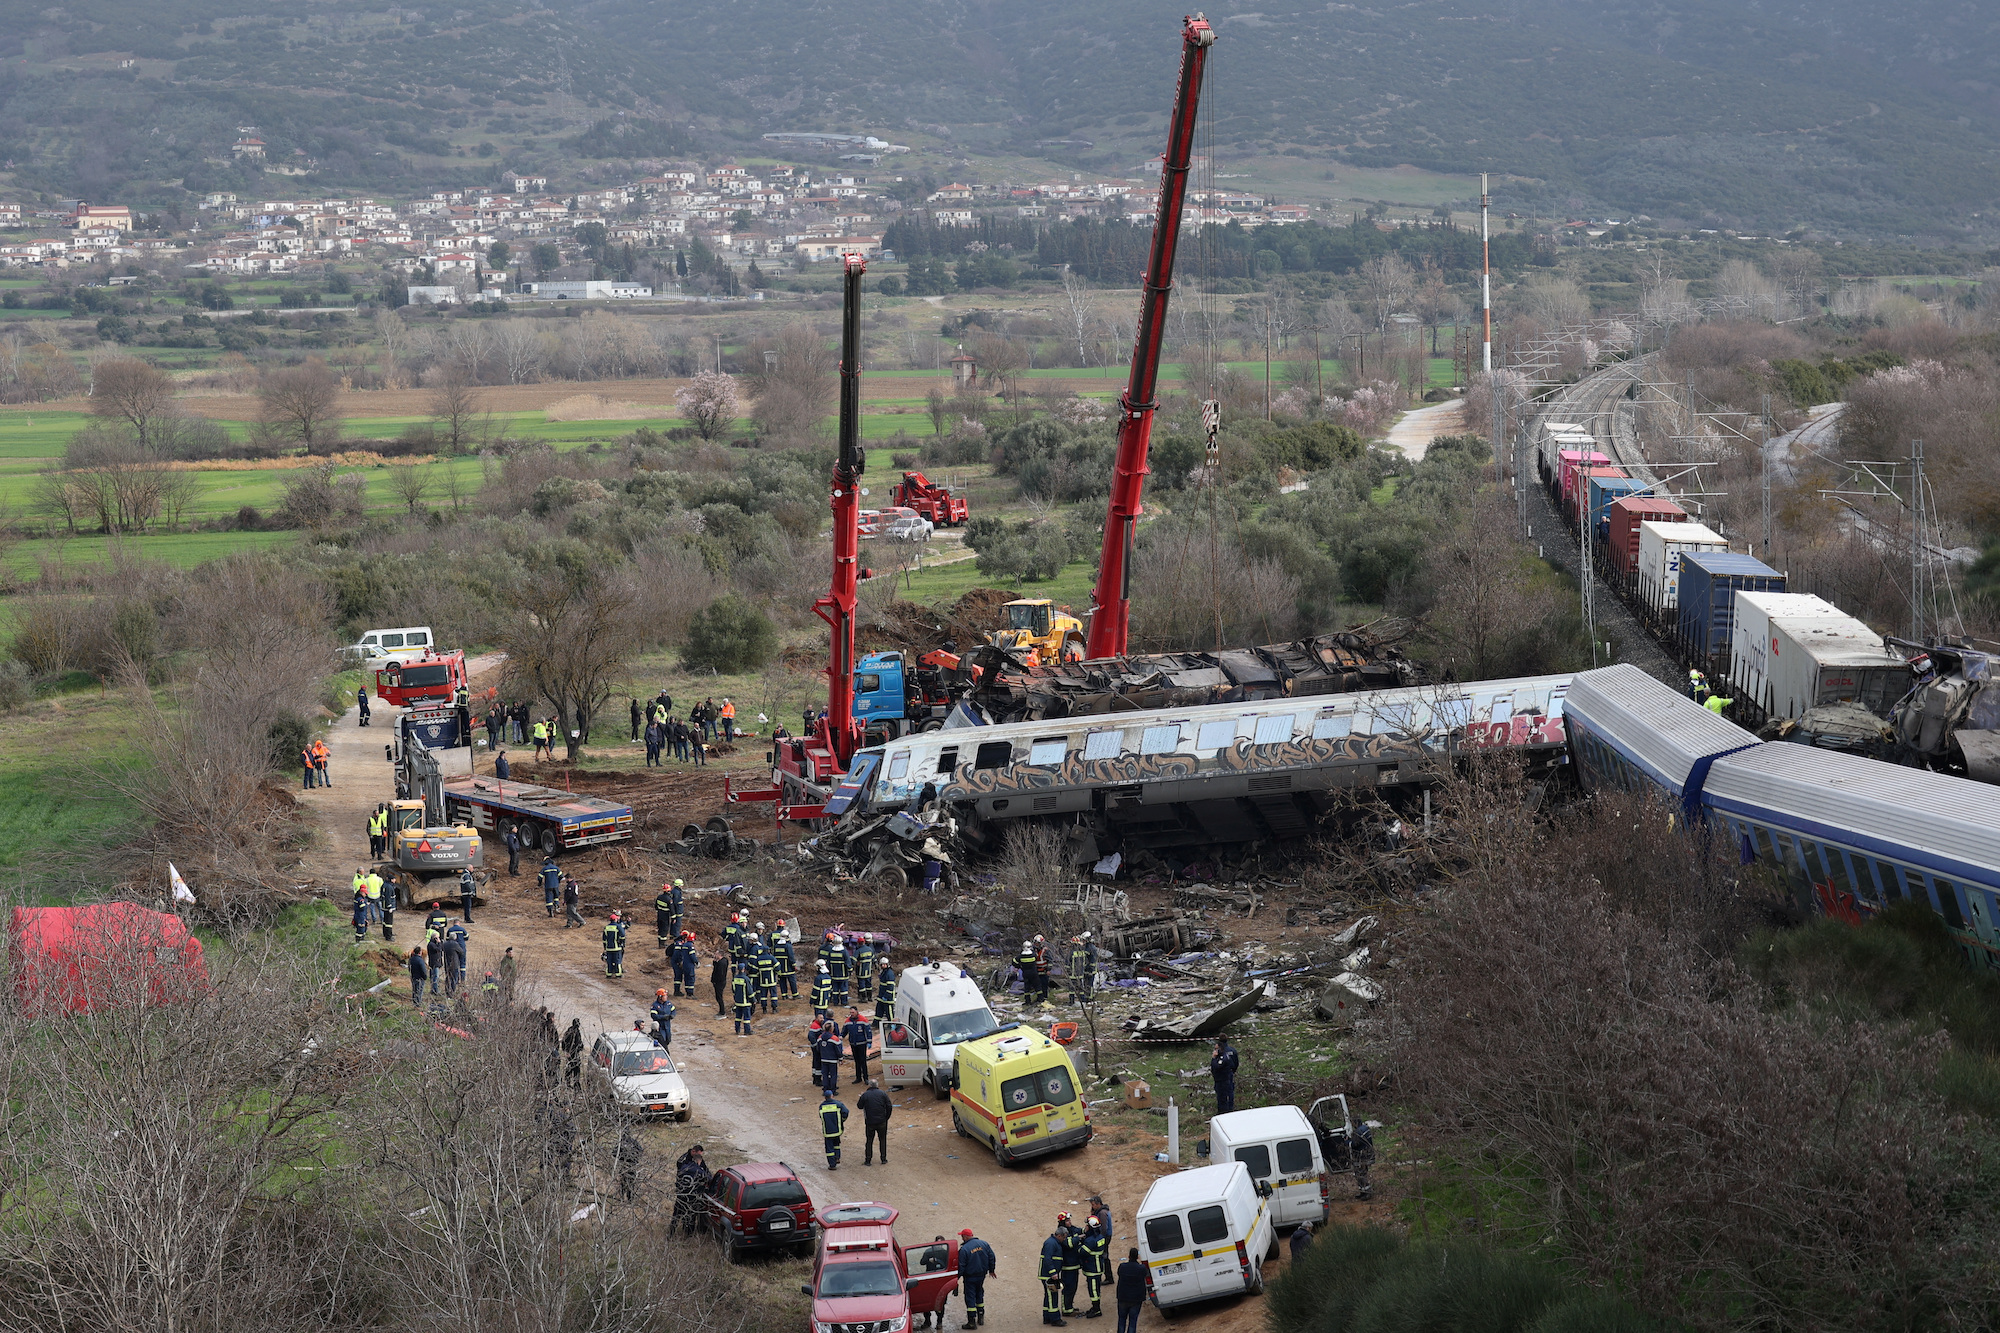 Rescuers operate at the site of a crash near the city of Larissa on Wednesday.